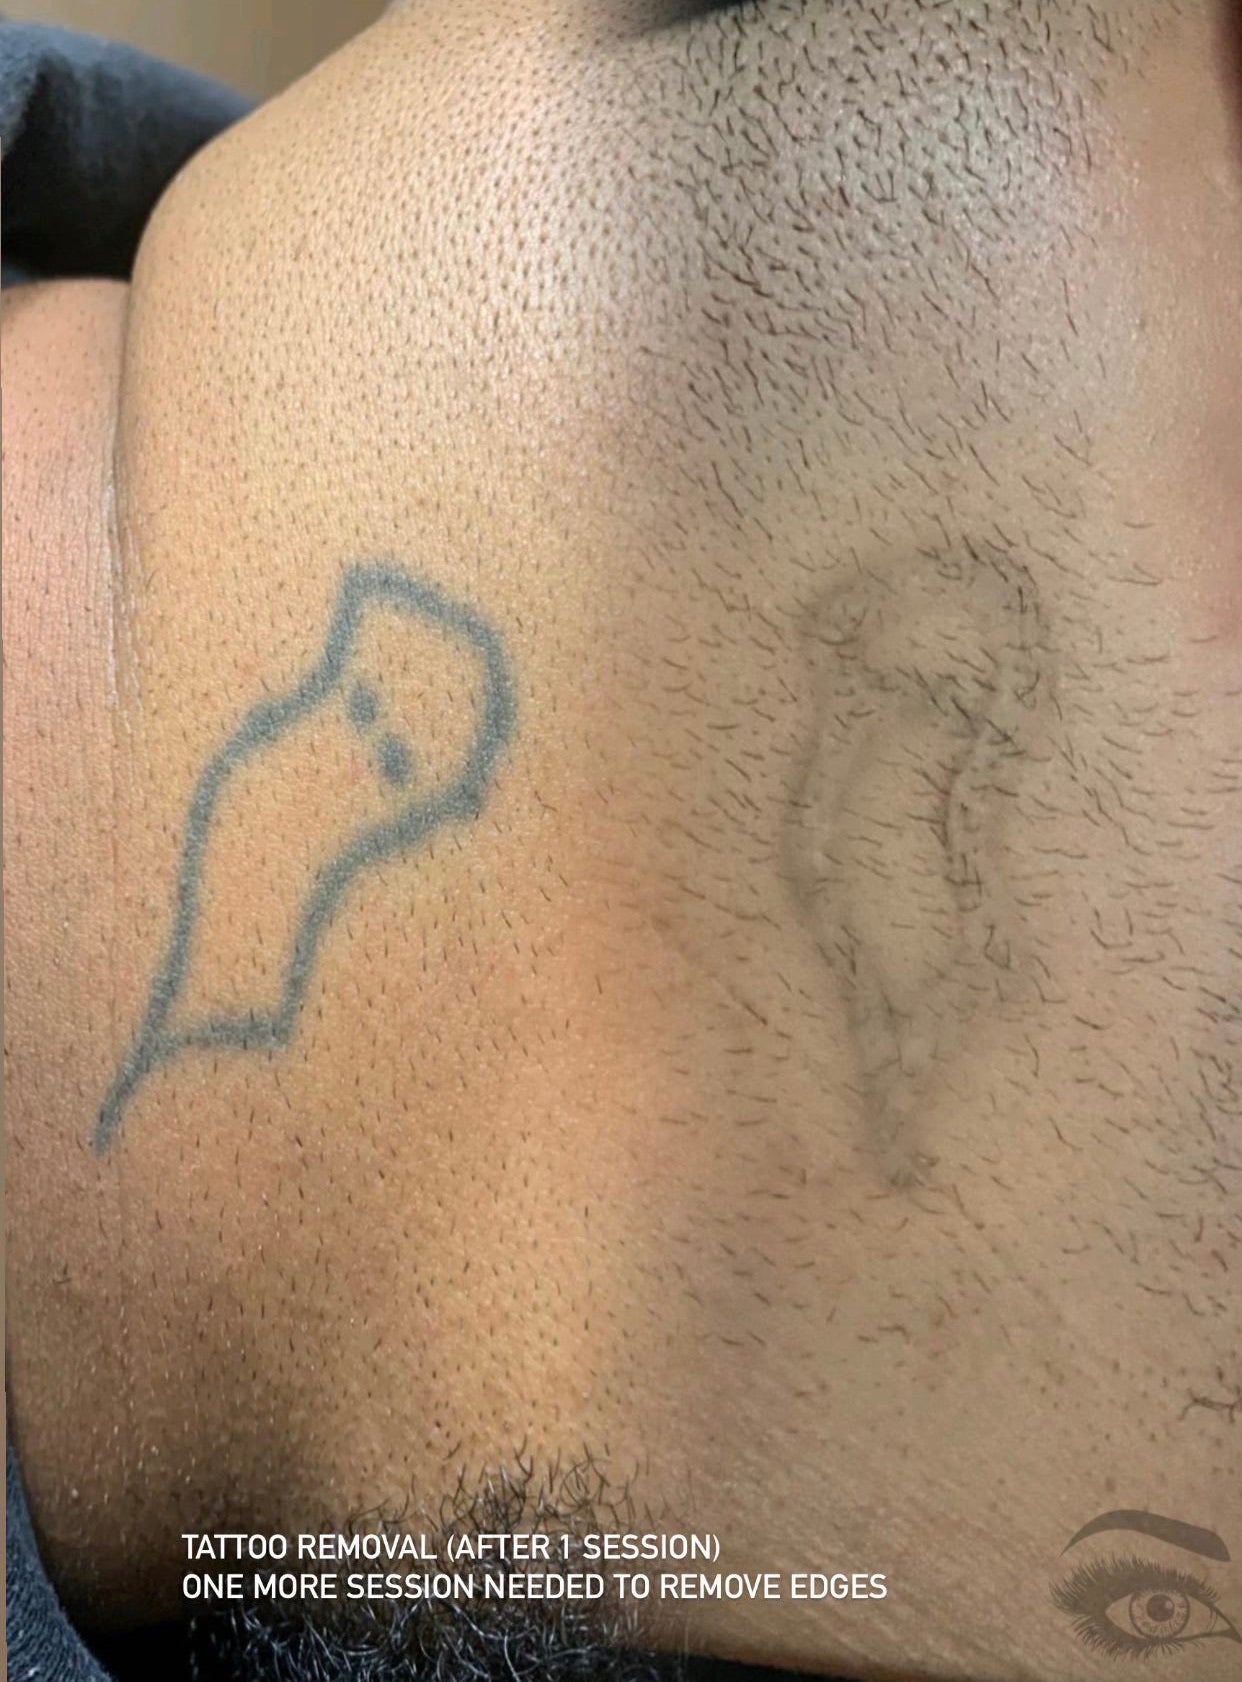 Laser Tattoo Removal with PicoSure Laser Treatment - Epilium & Skin